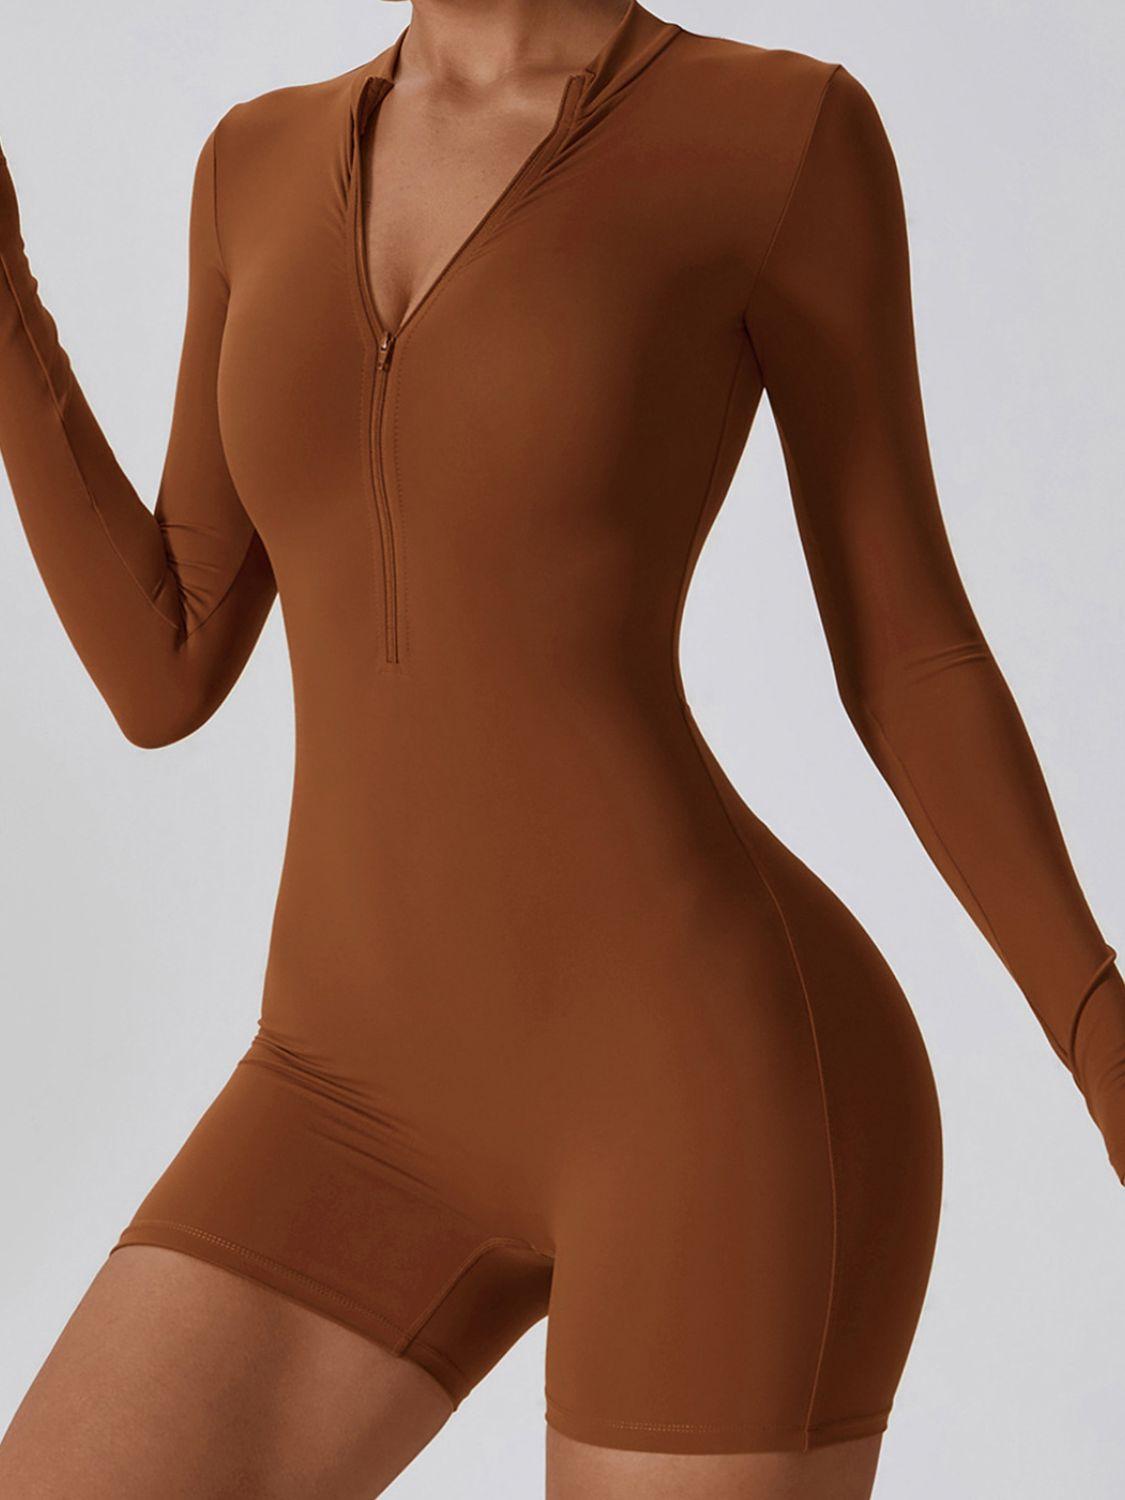 a woman in a brown bodysuit holding a cigarette